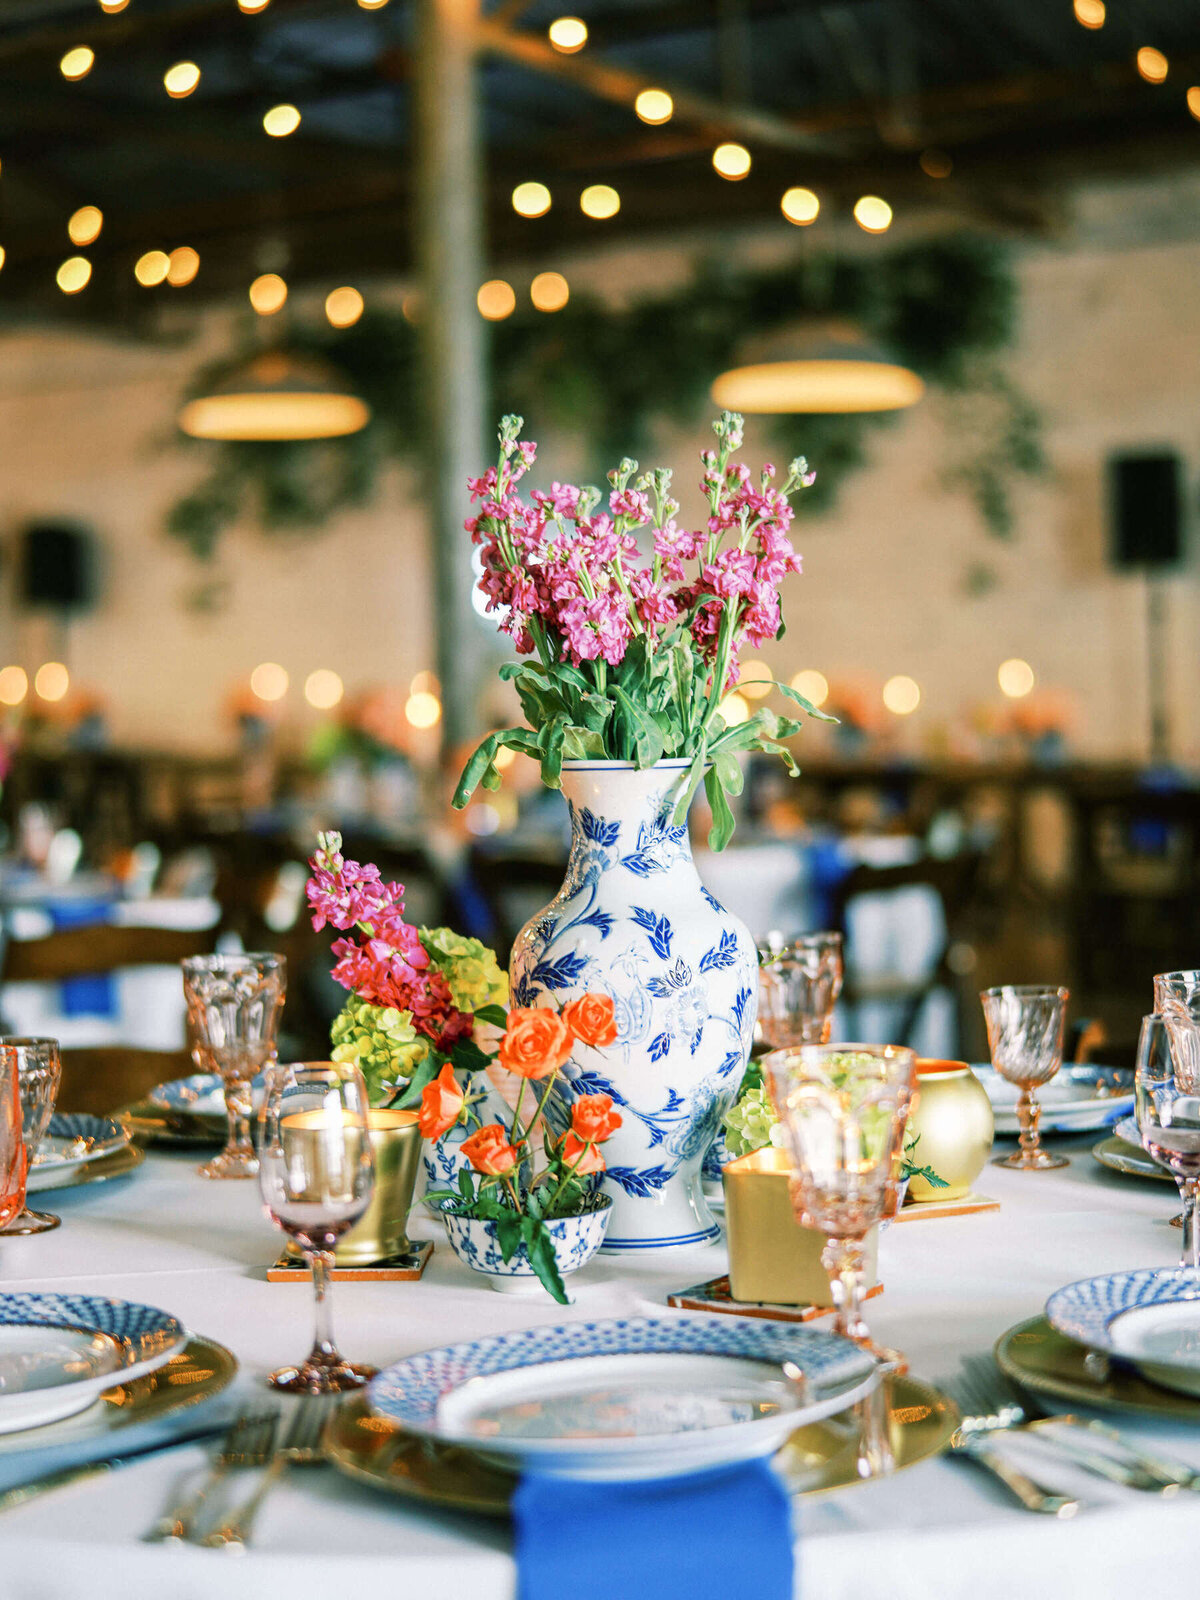 Warm and colorful table centerpieces for wedding at The 4Eleven venue